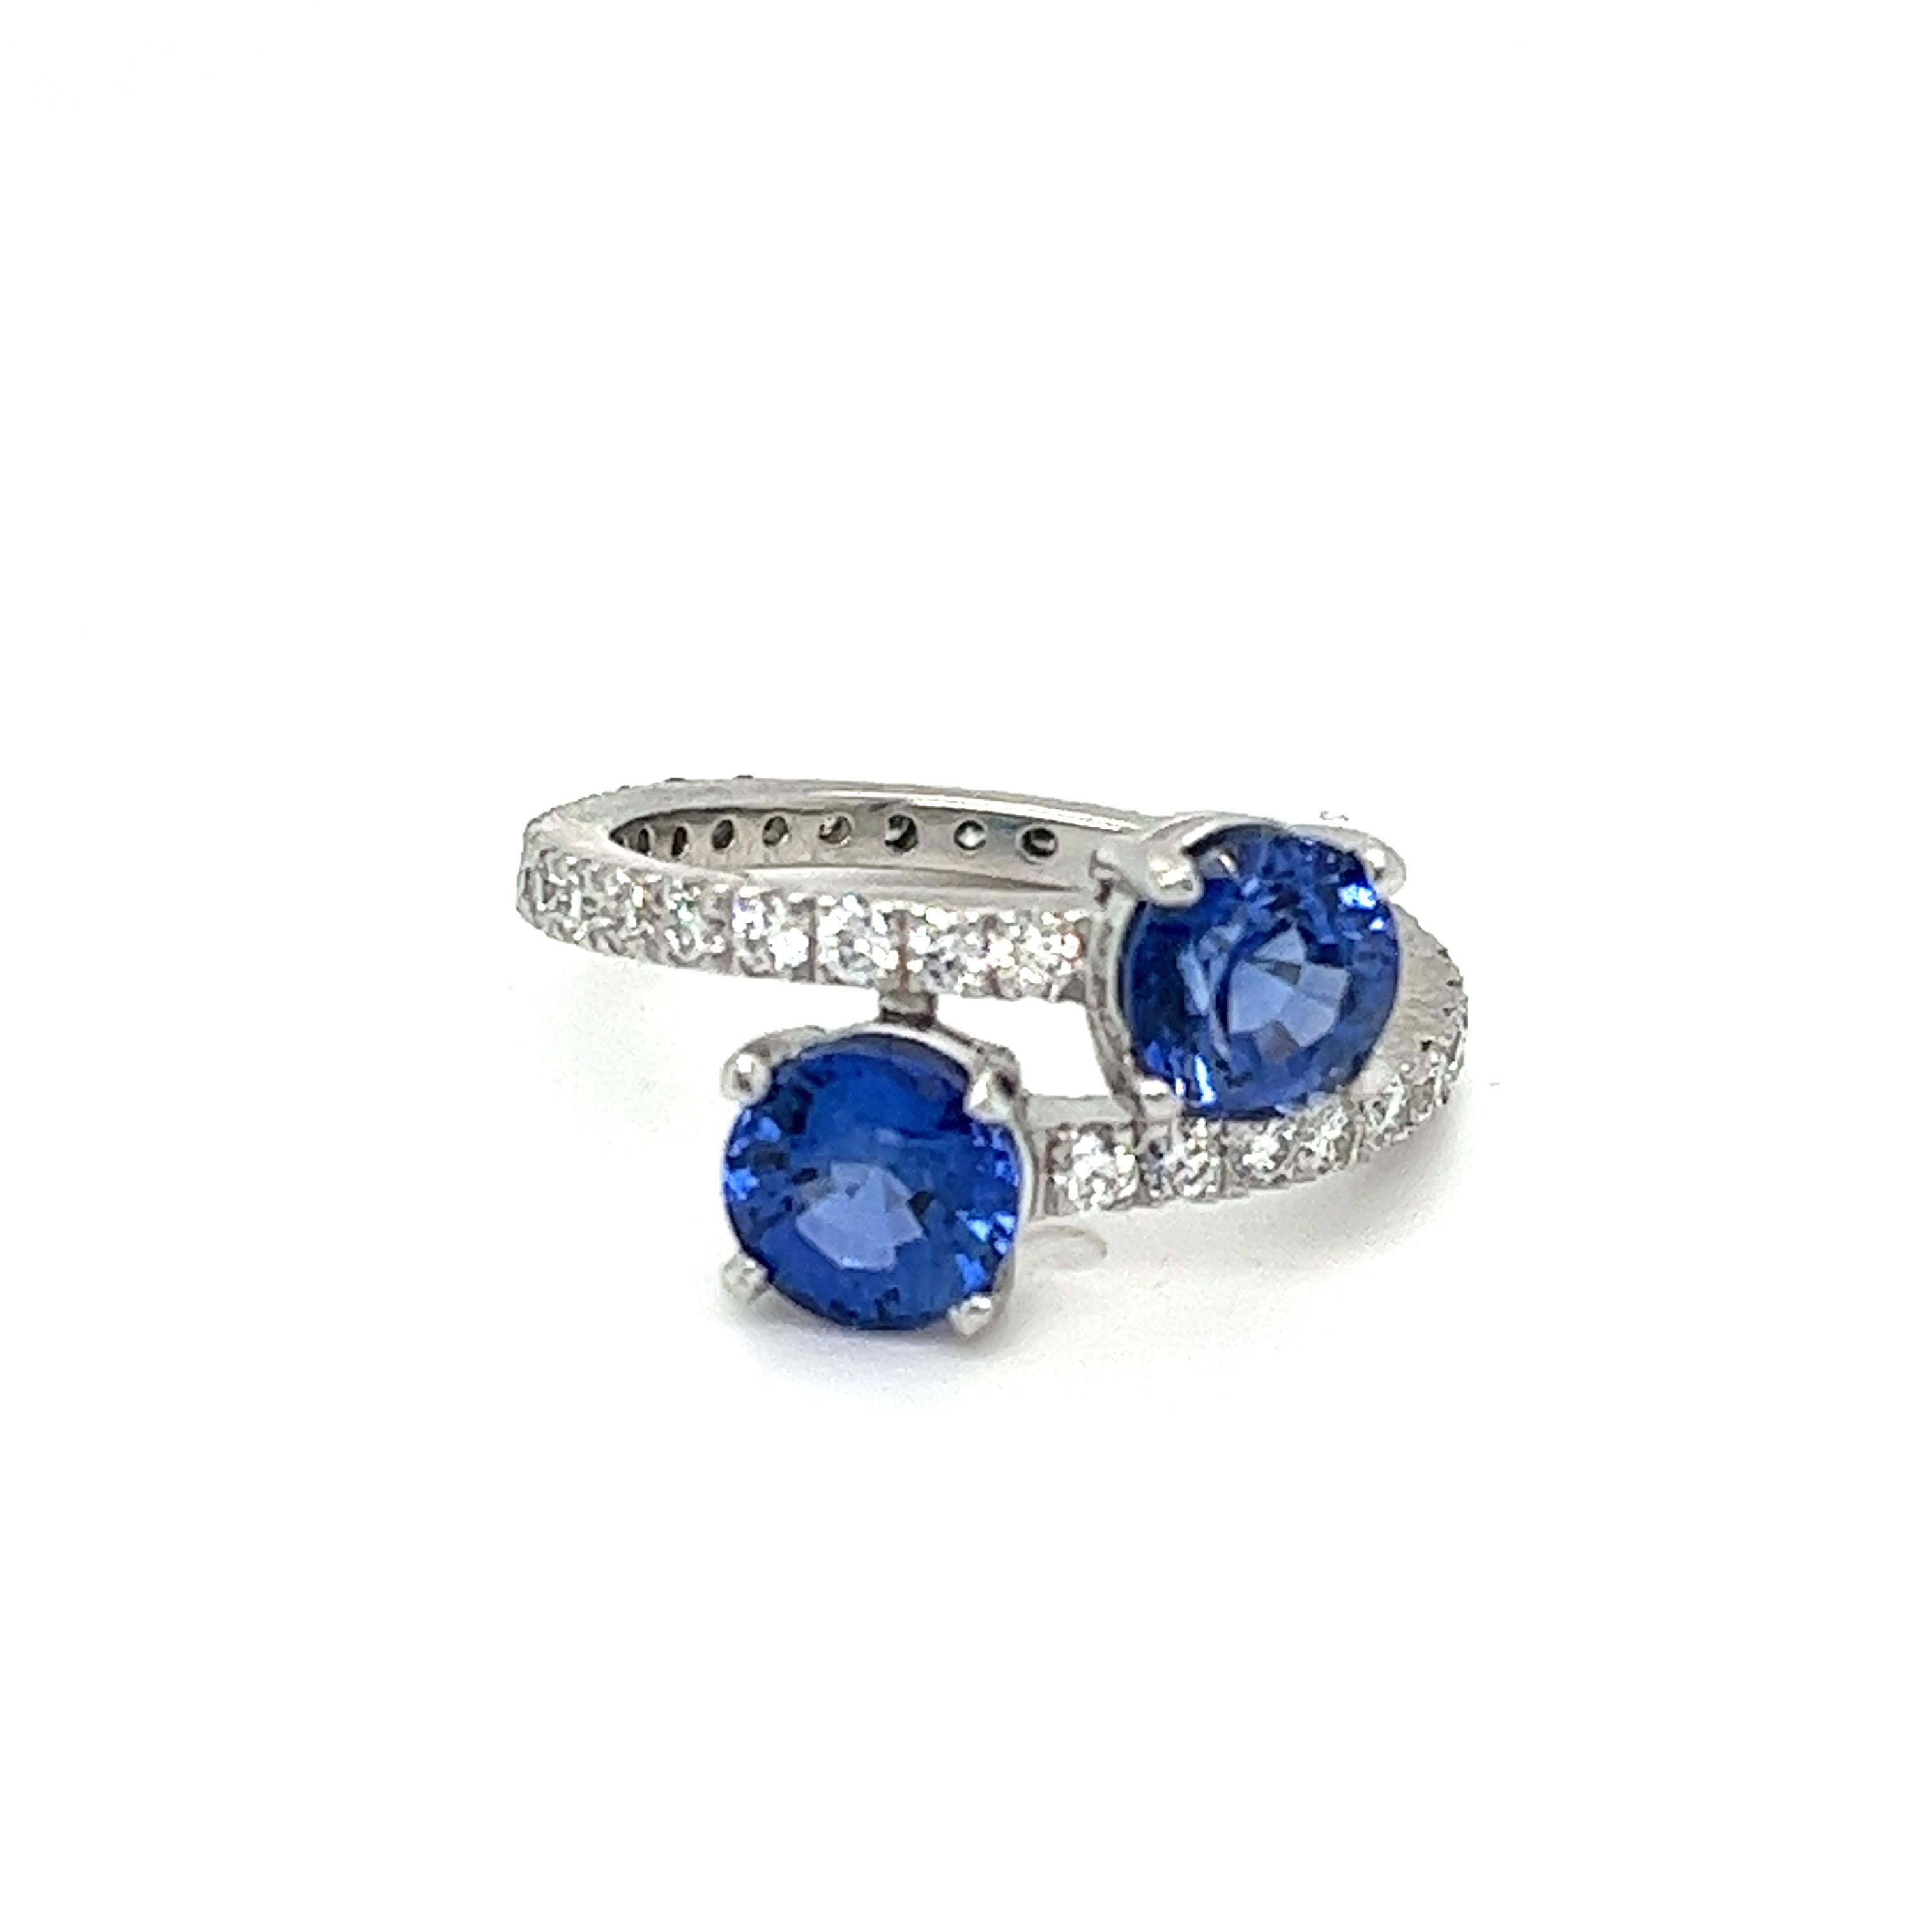 Elegance and symbolism intertwine in this breathtaking Toi et Moi crossover ring, crafted in precious 950 platinum. Featuring two natural earth-mined round sapphires, totaling approximately 2 carats, this ring symbolizes the union of two souls.